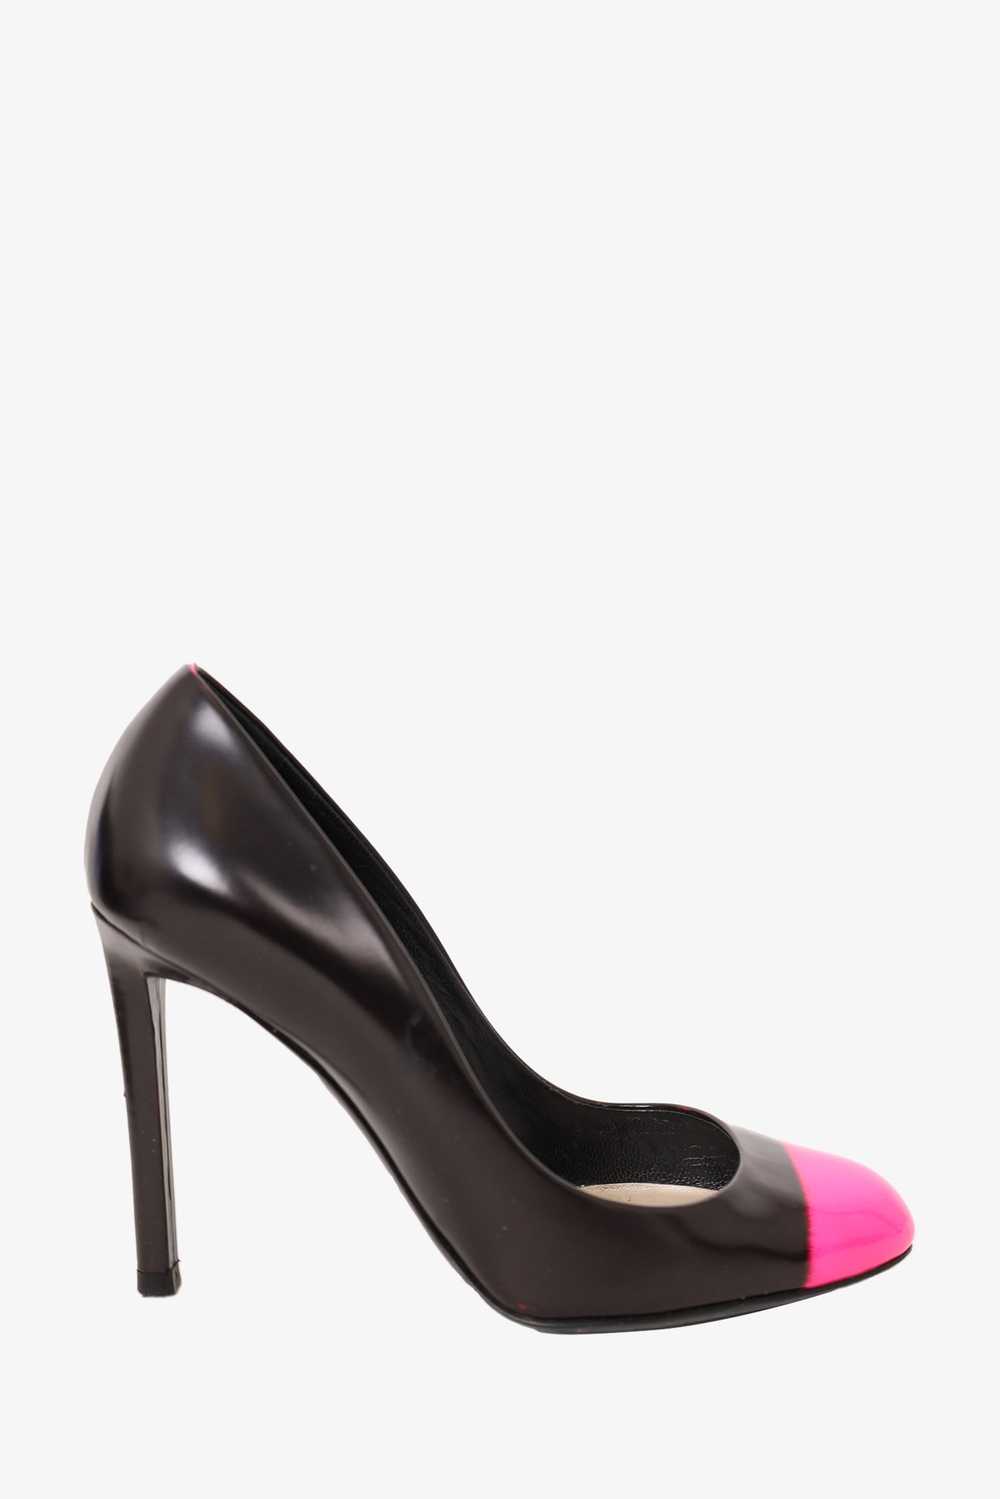 Christian Dior Black with Neon Pink Toe Leather P… - image 1